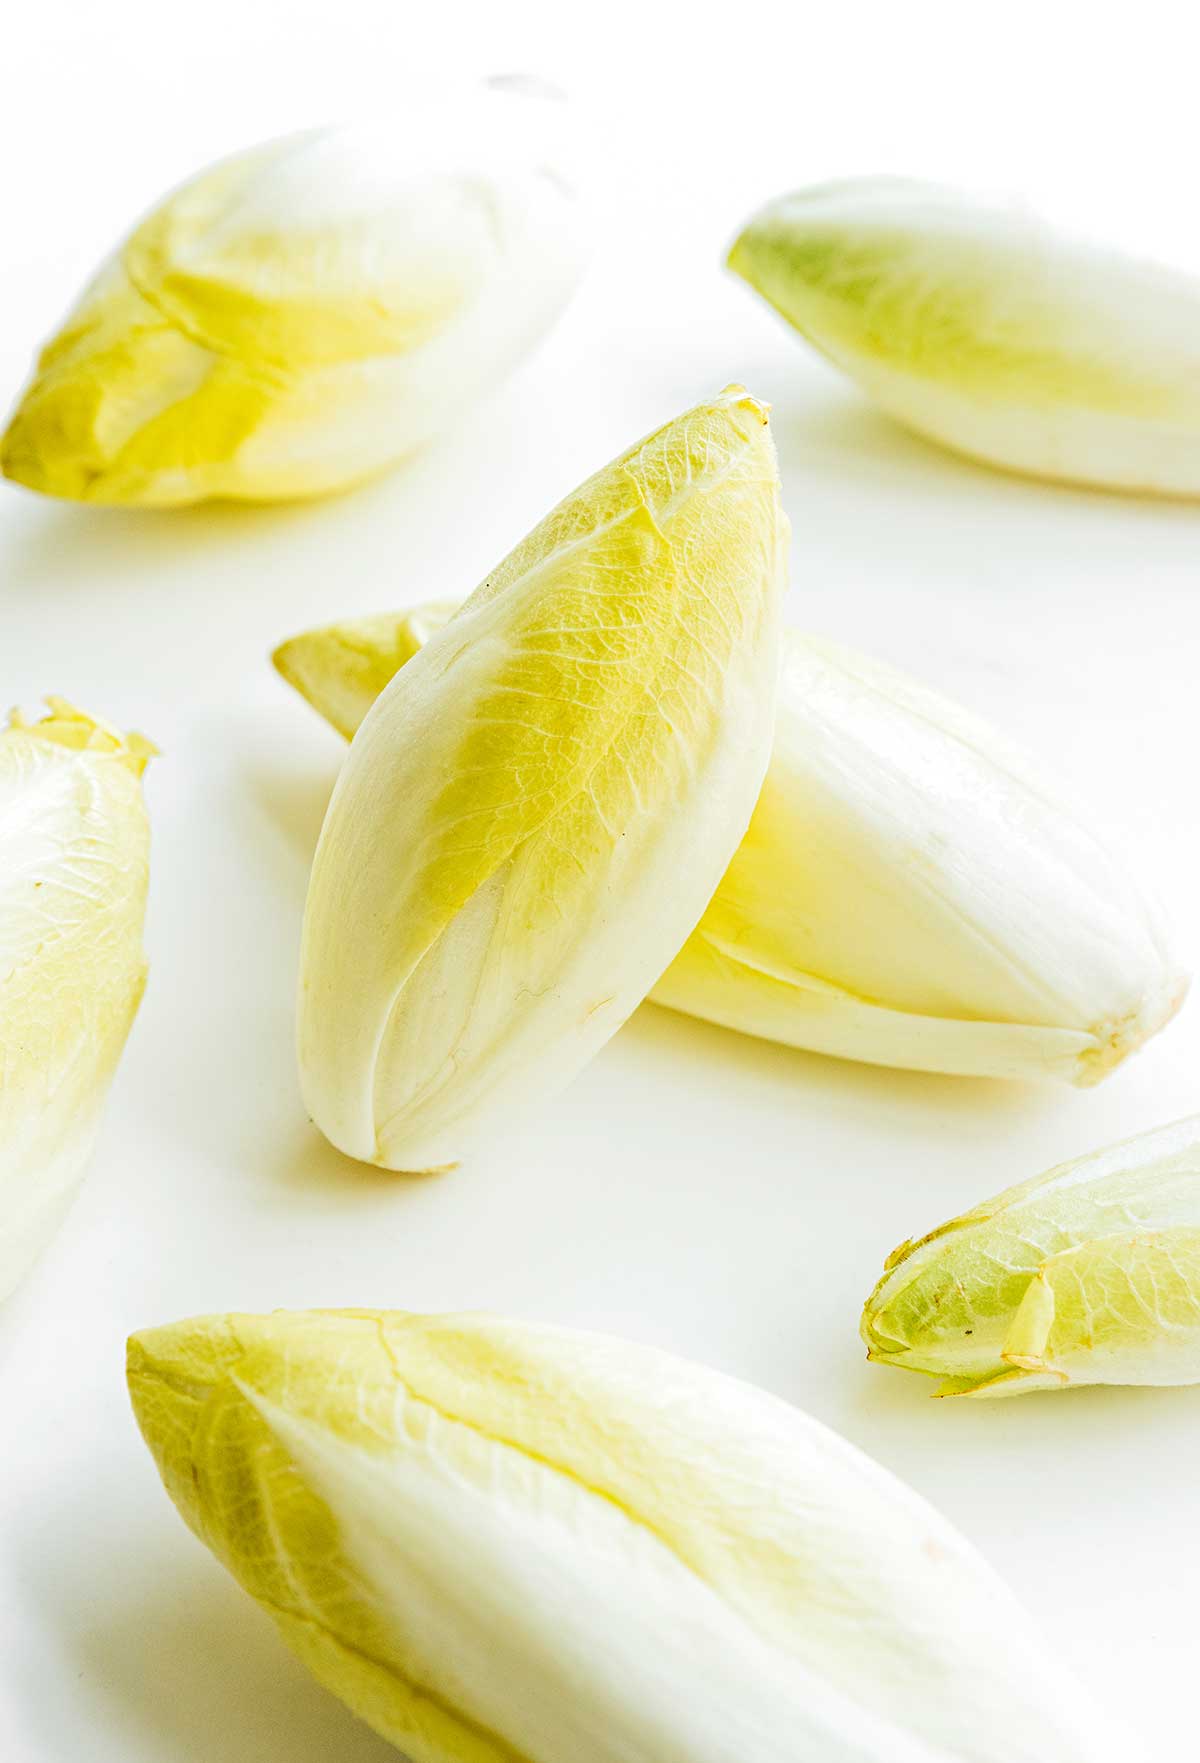 Seven light yellow endives arranged on a white background